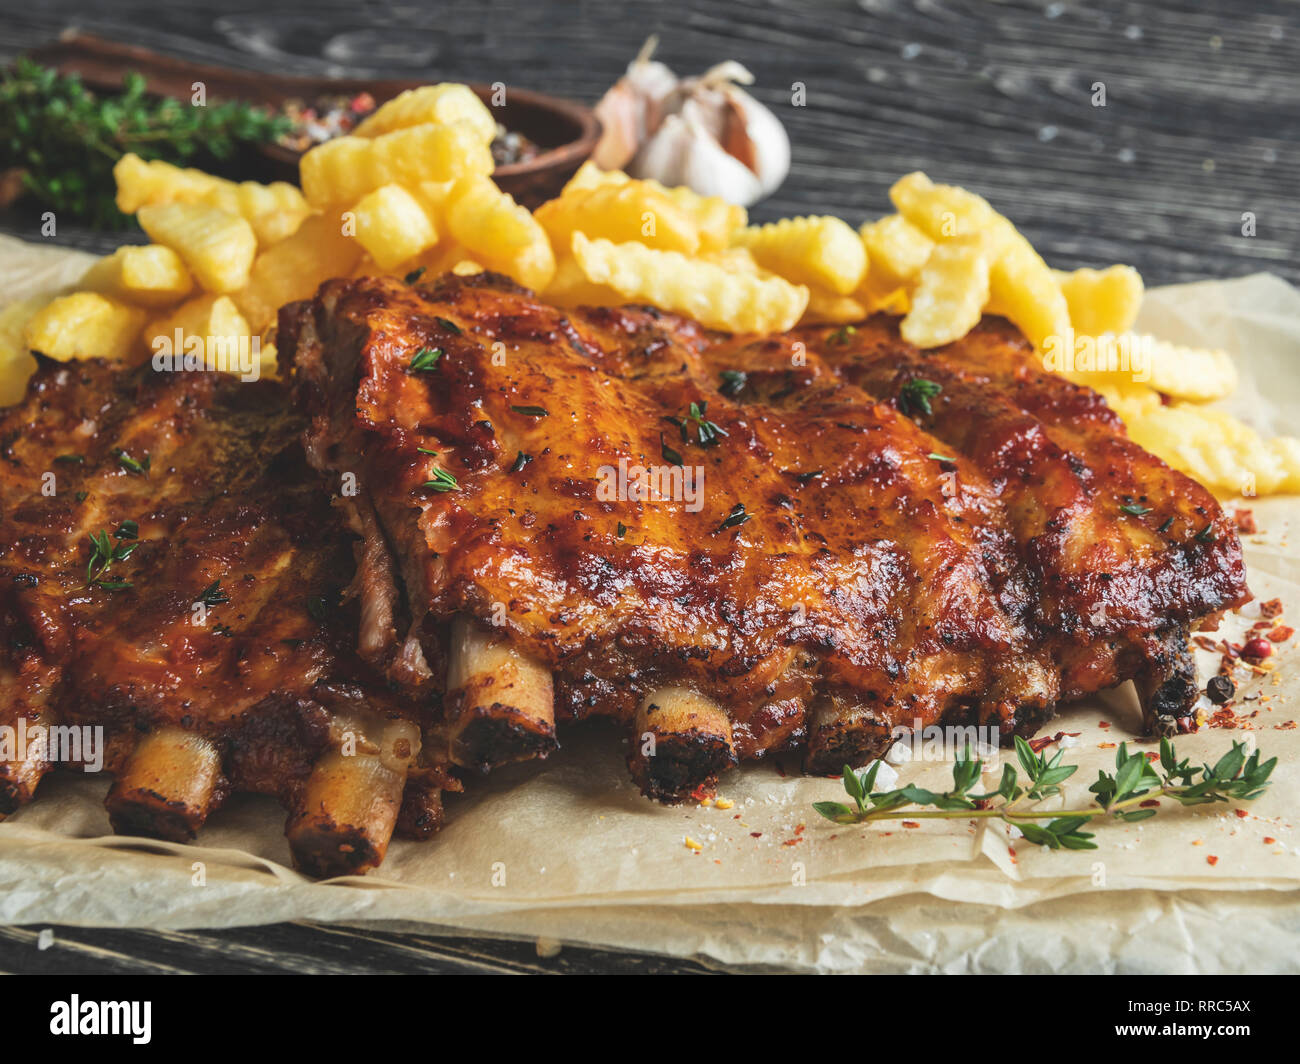 grilled pork ribs with sauce on a cutting board, french fries Stock Photo